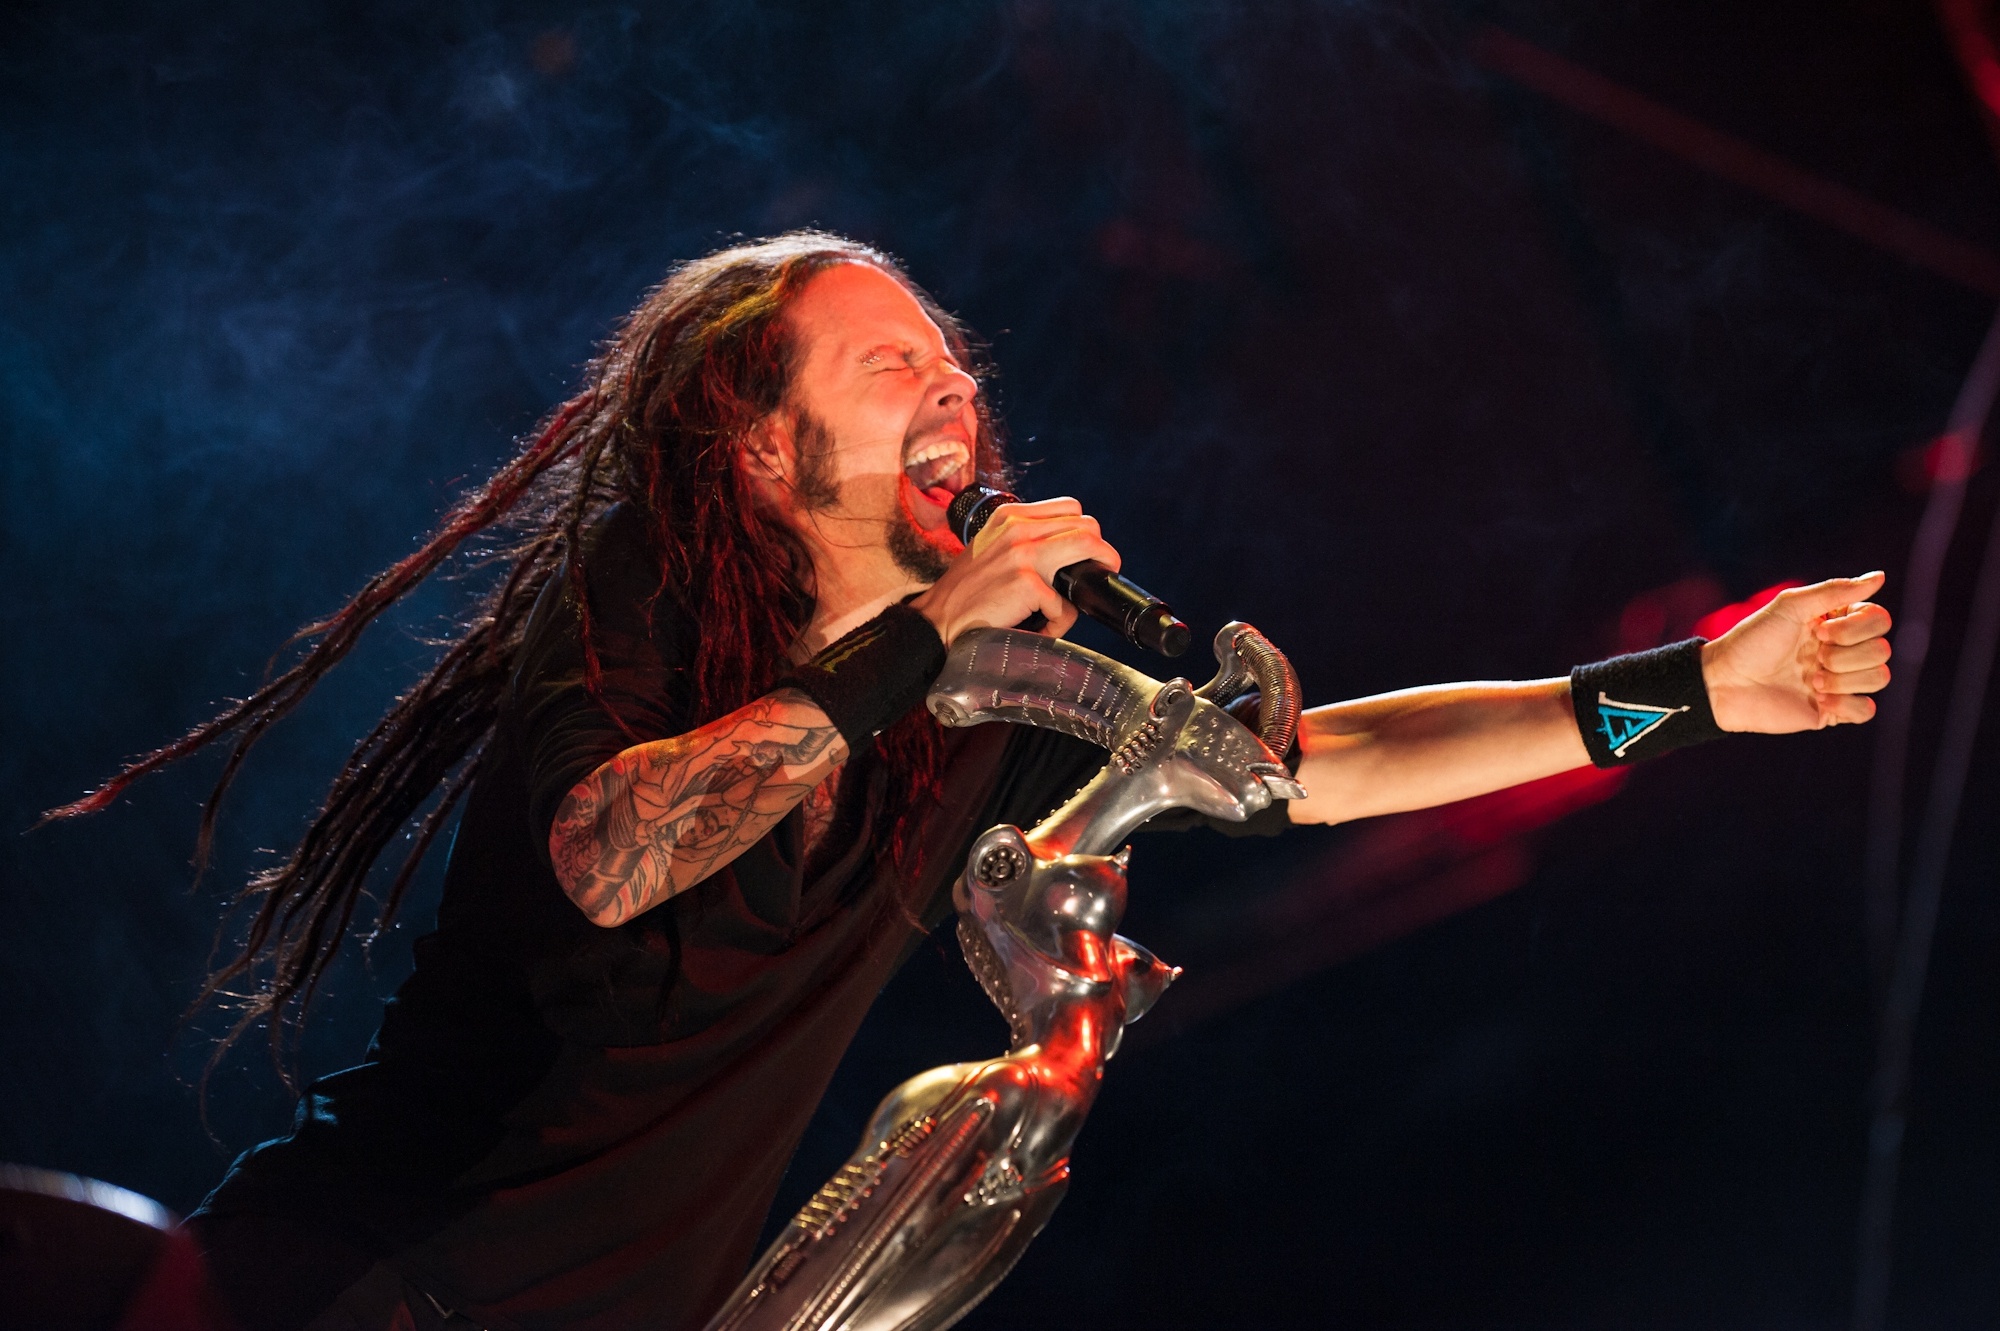 Korn wallpapers, High-quality images, Pictures, Backgrounds, 2000x1340 HD Desktop